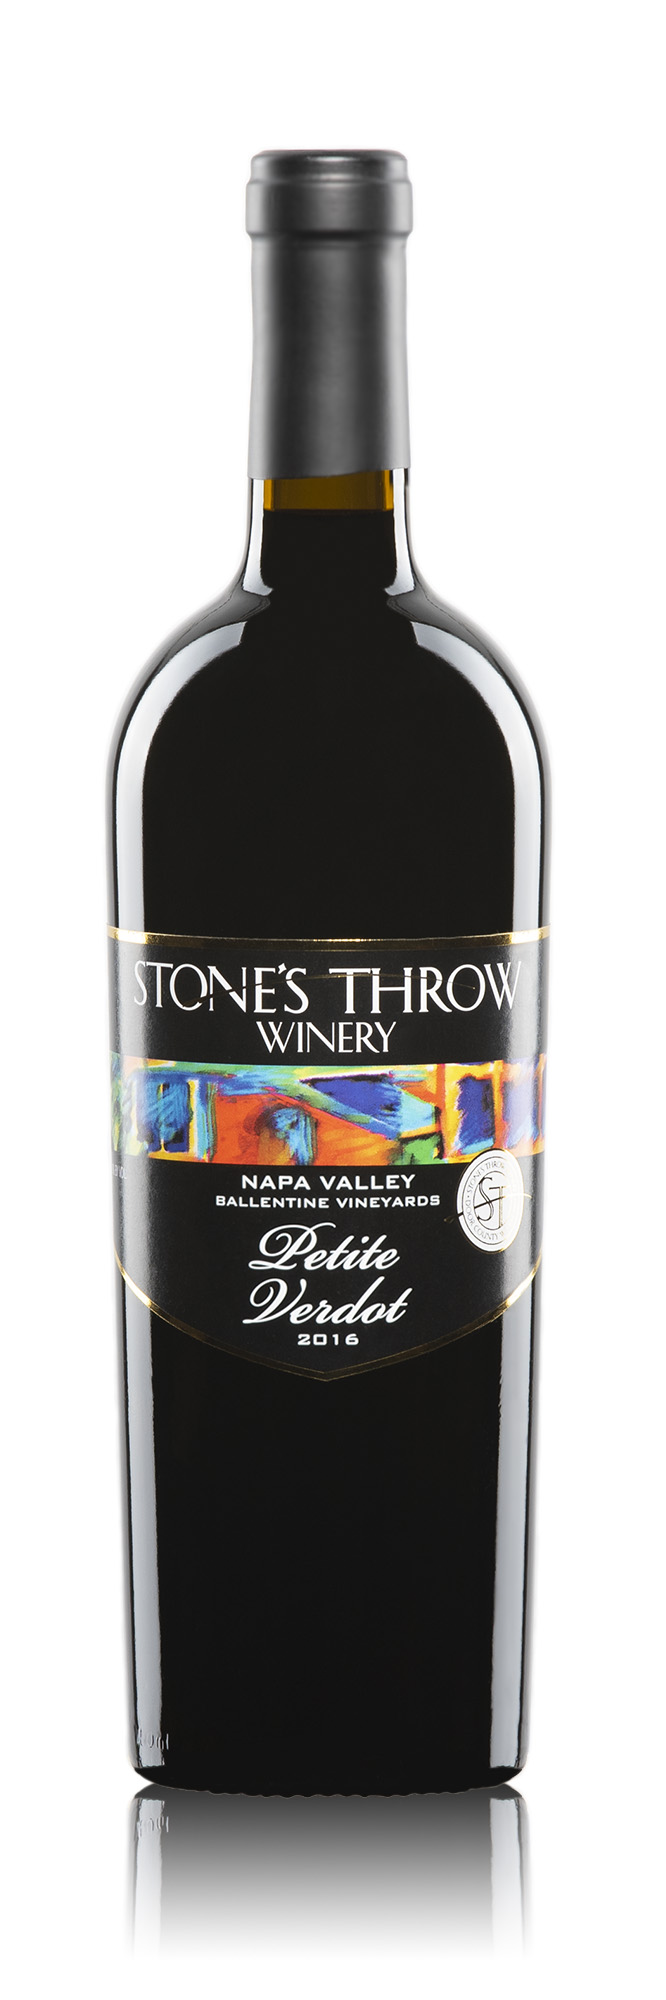 Product Image for Petite Verdot, Napa Valley, Crazy Joey's Reserve 2019